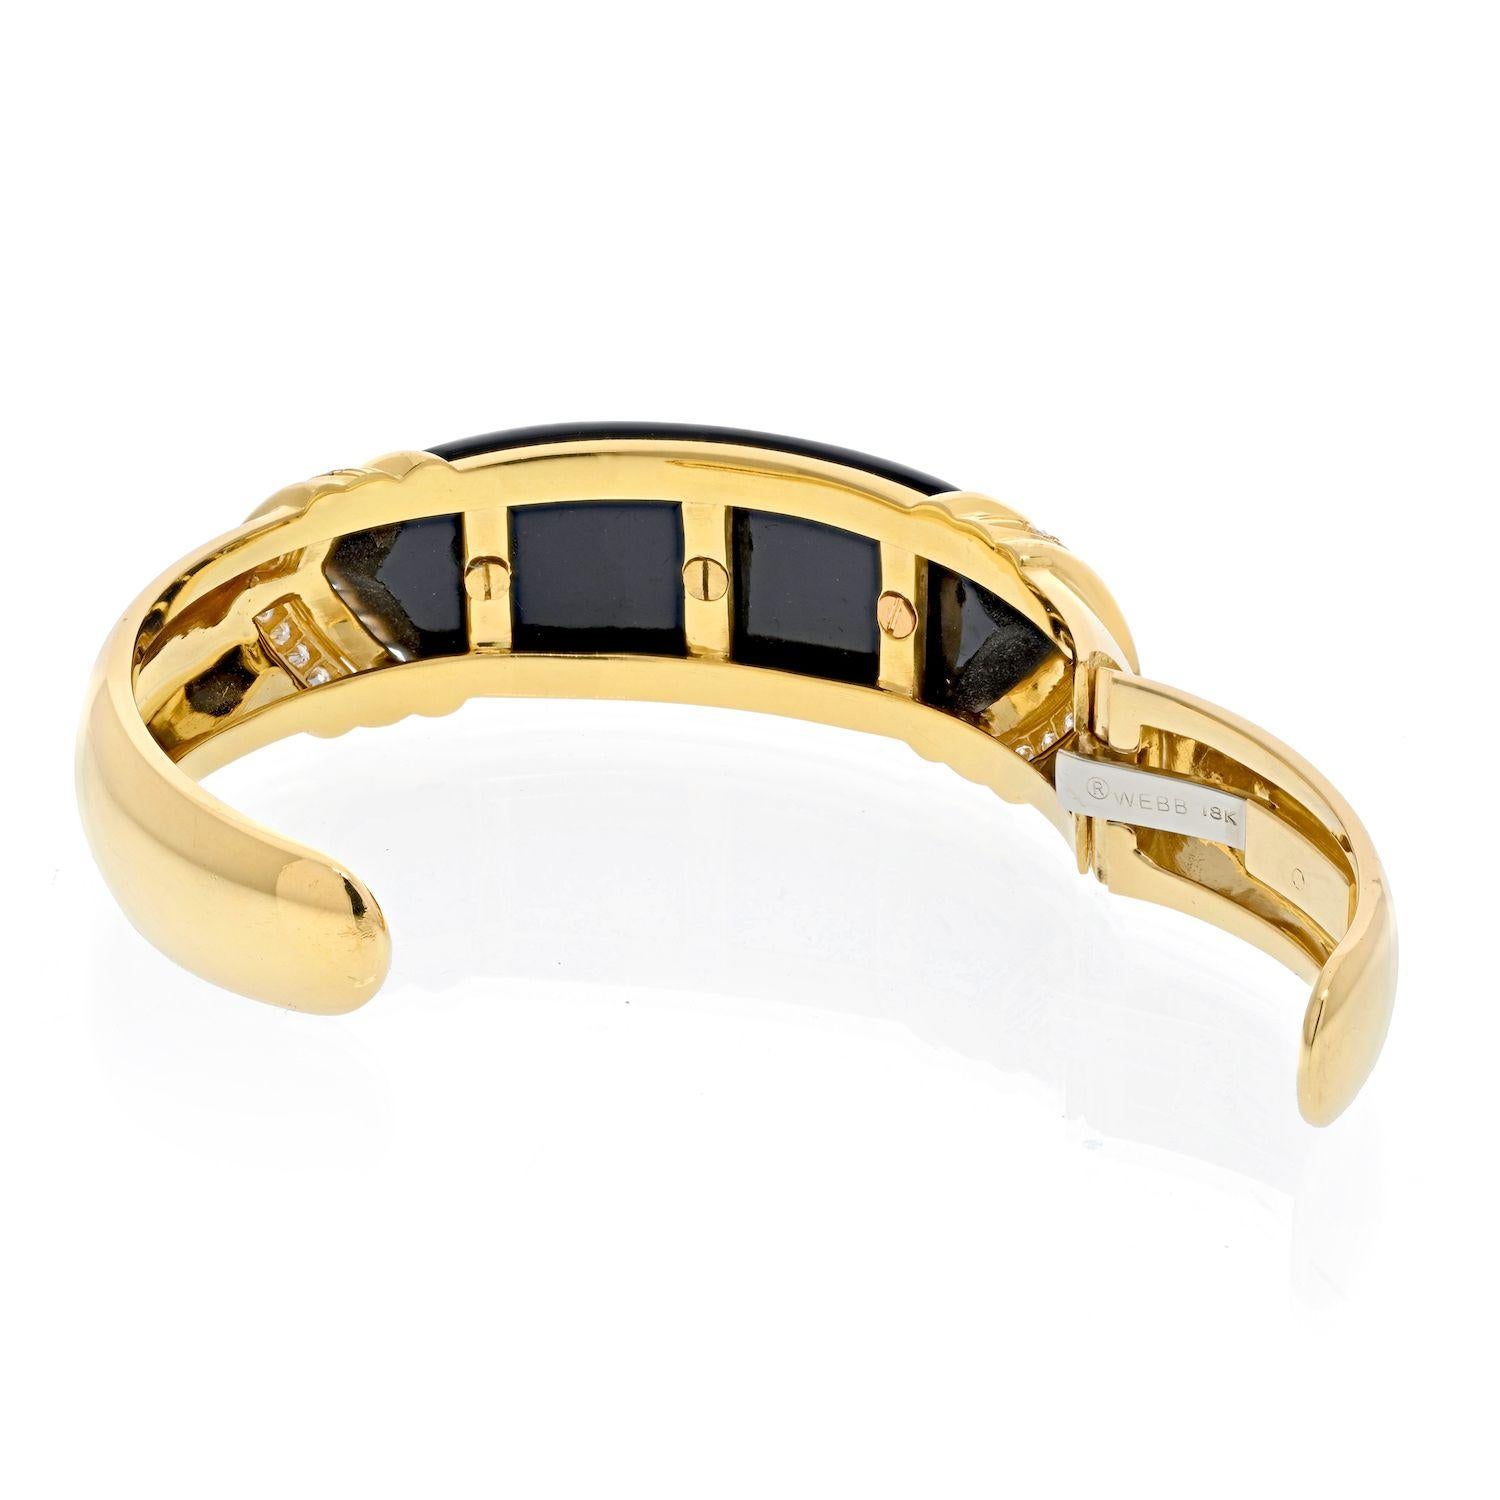 Of hinged design this is a great bracelet that easily goes from day to night this is what we think about this understated David Webb cuff. Made of 18K Yellow Gold set with one fluted onyx panel in the middle, and flanked by 22 round brilliant cut